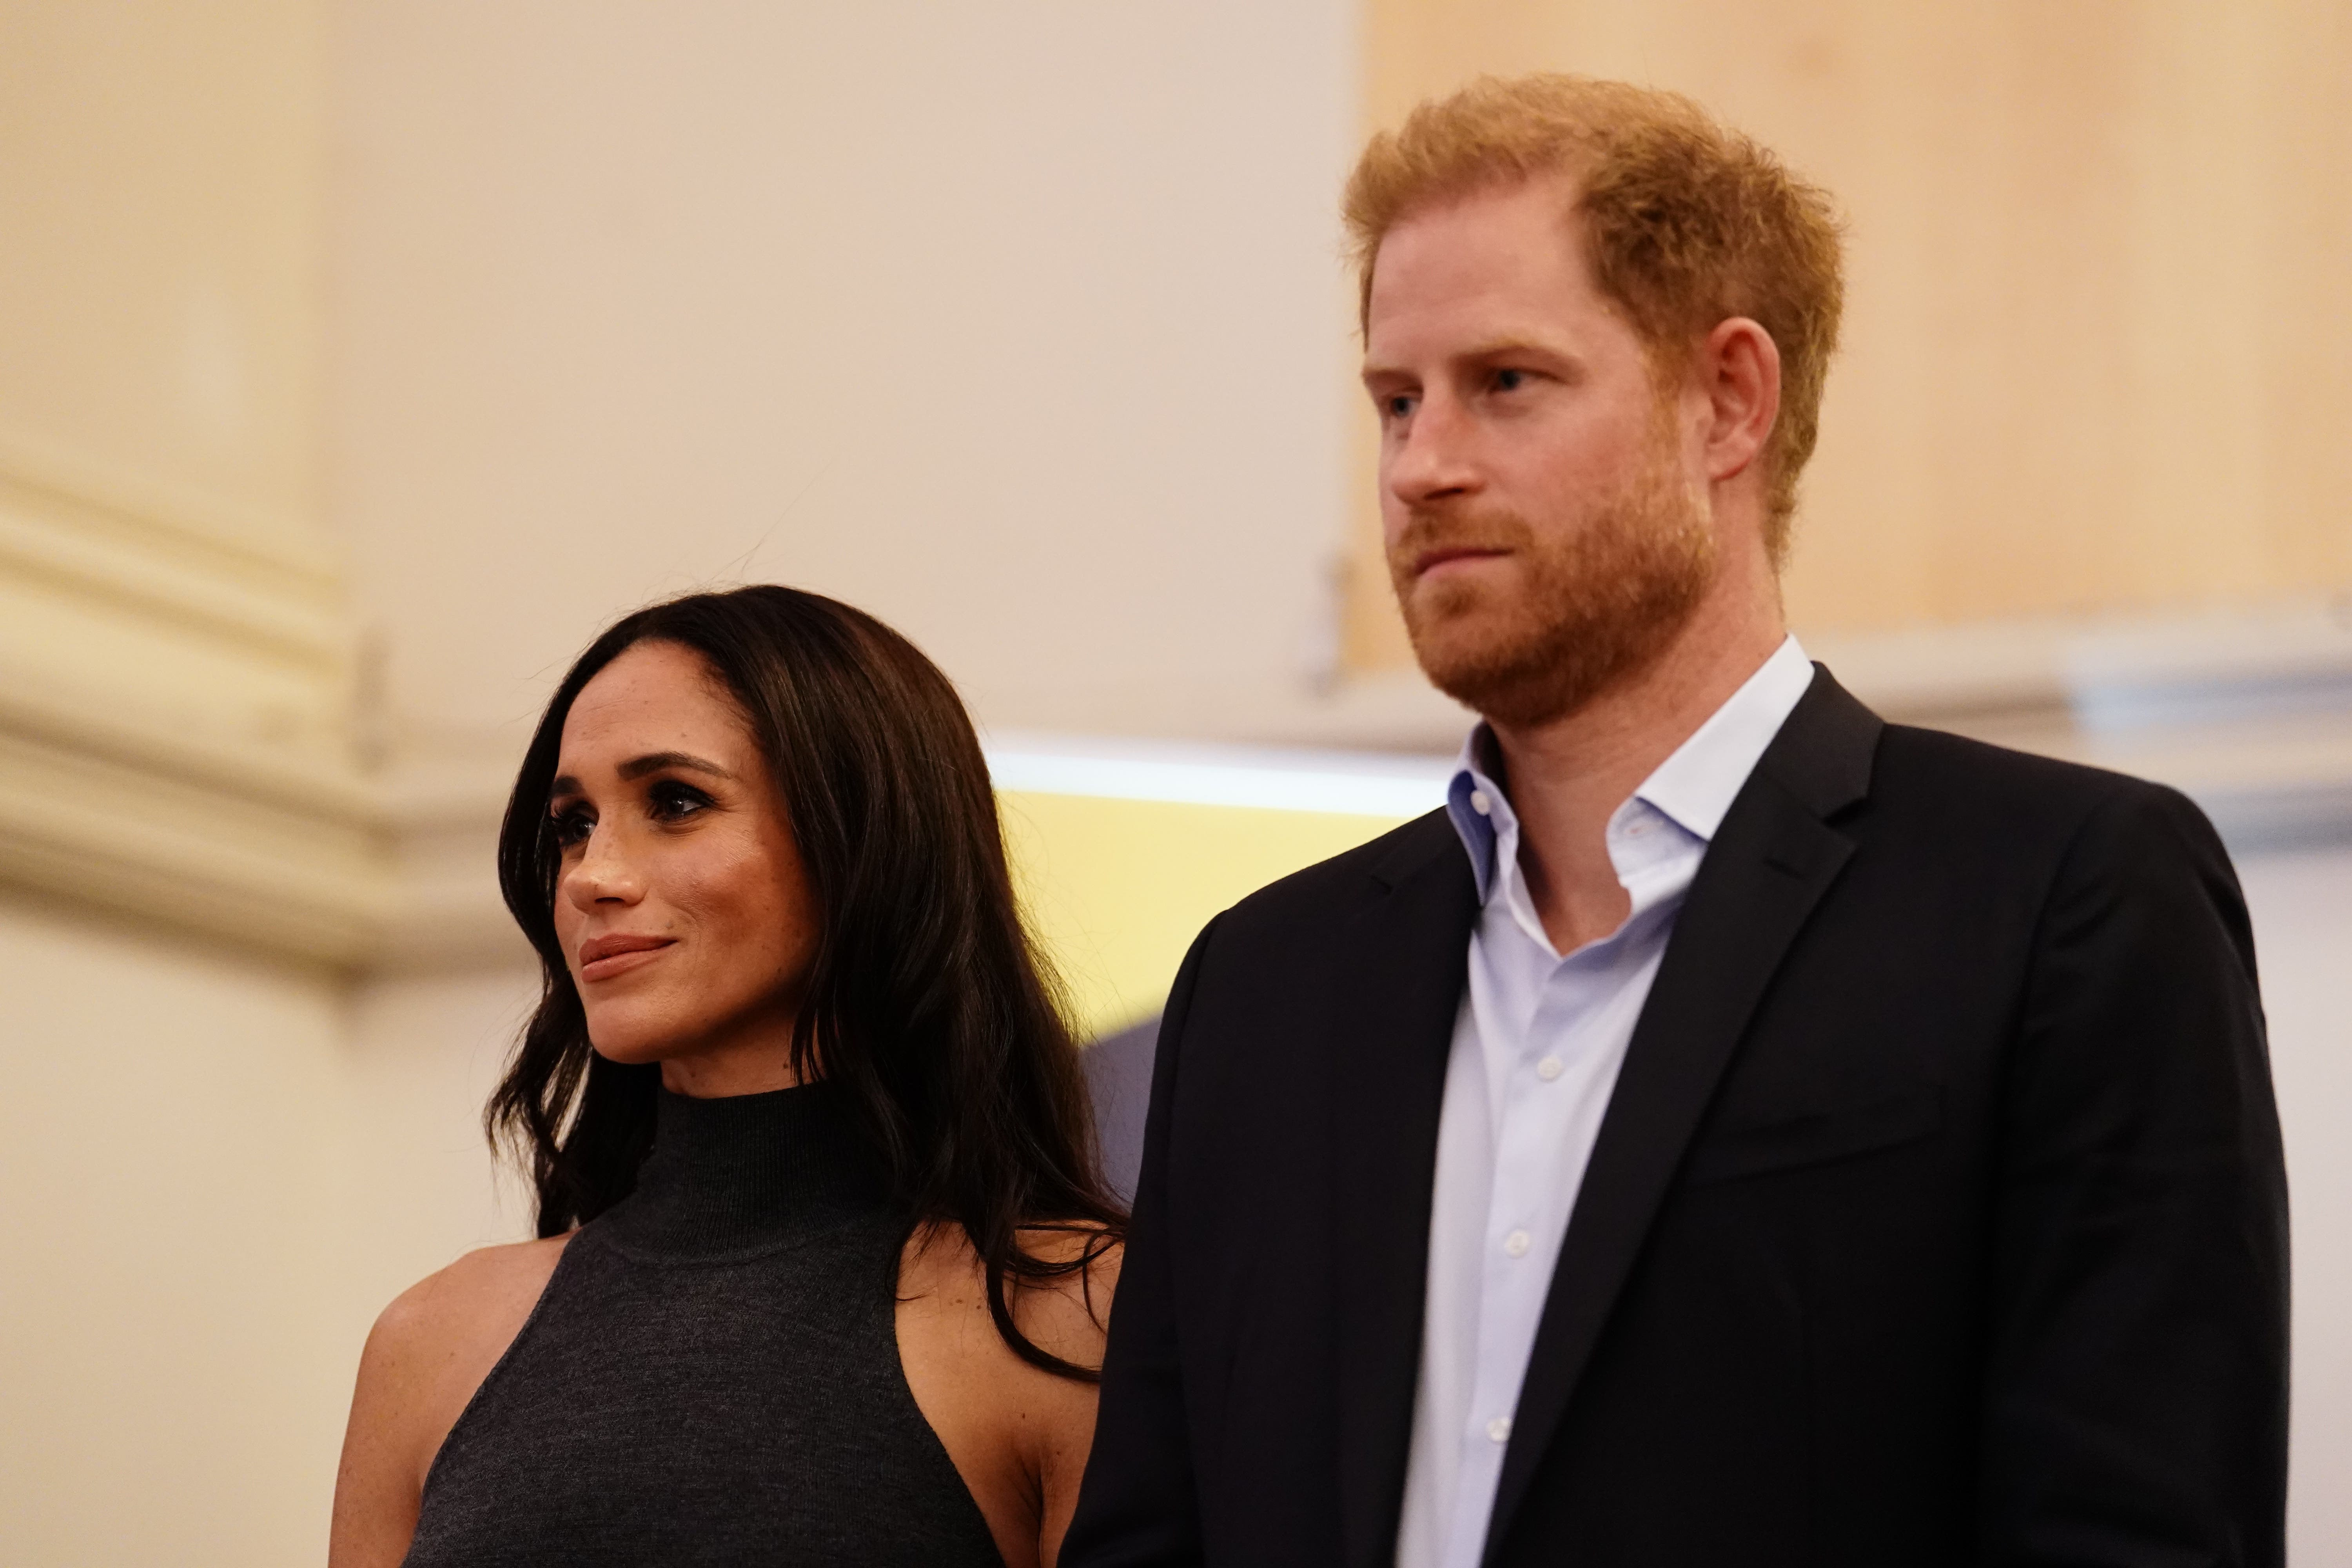 Meghan “rewrote Harry’s history”, Kate’s uncle said on Celebrity Big Brother